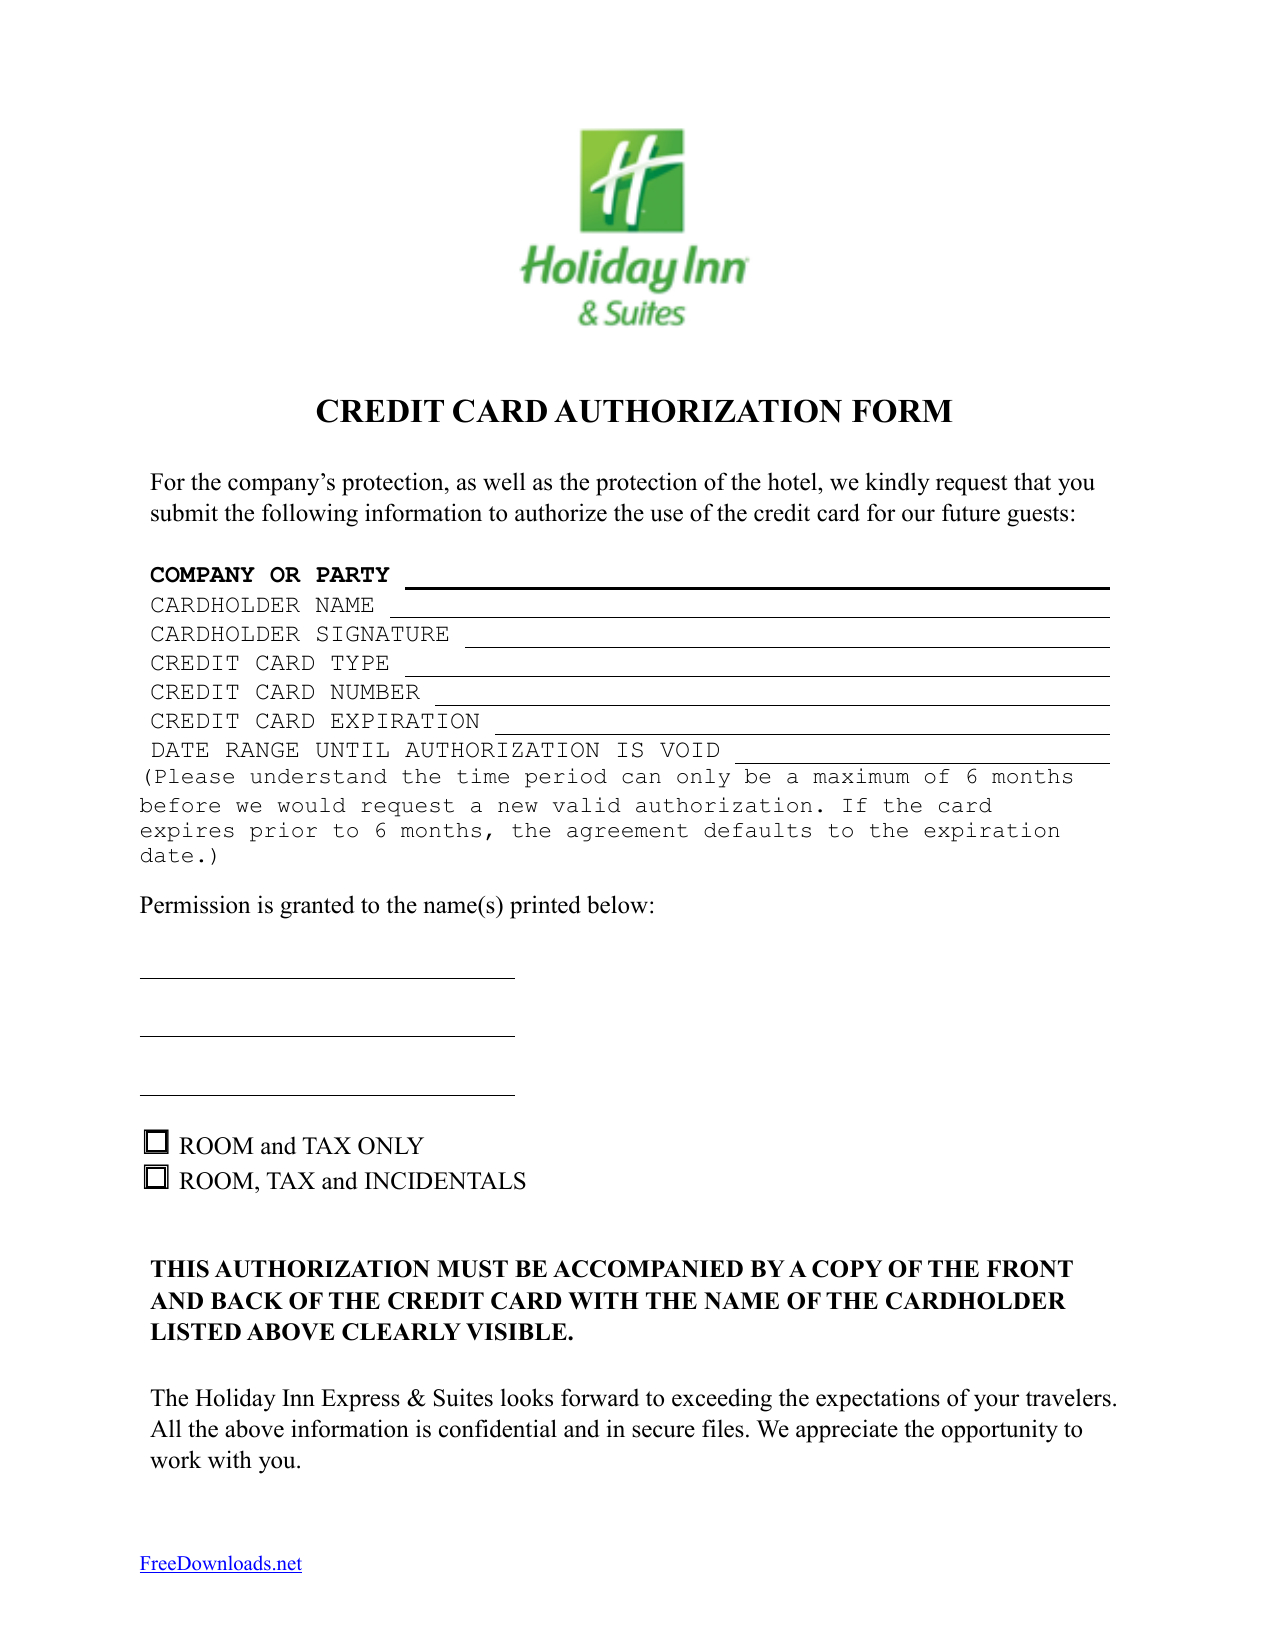 Download Holiday Inn Credit Card Authorization Form Template In Hotel Credit Card Authorization Form Template